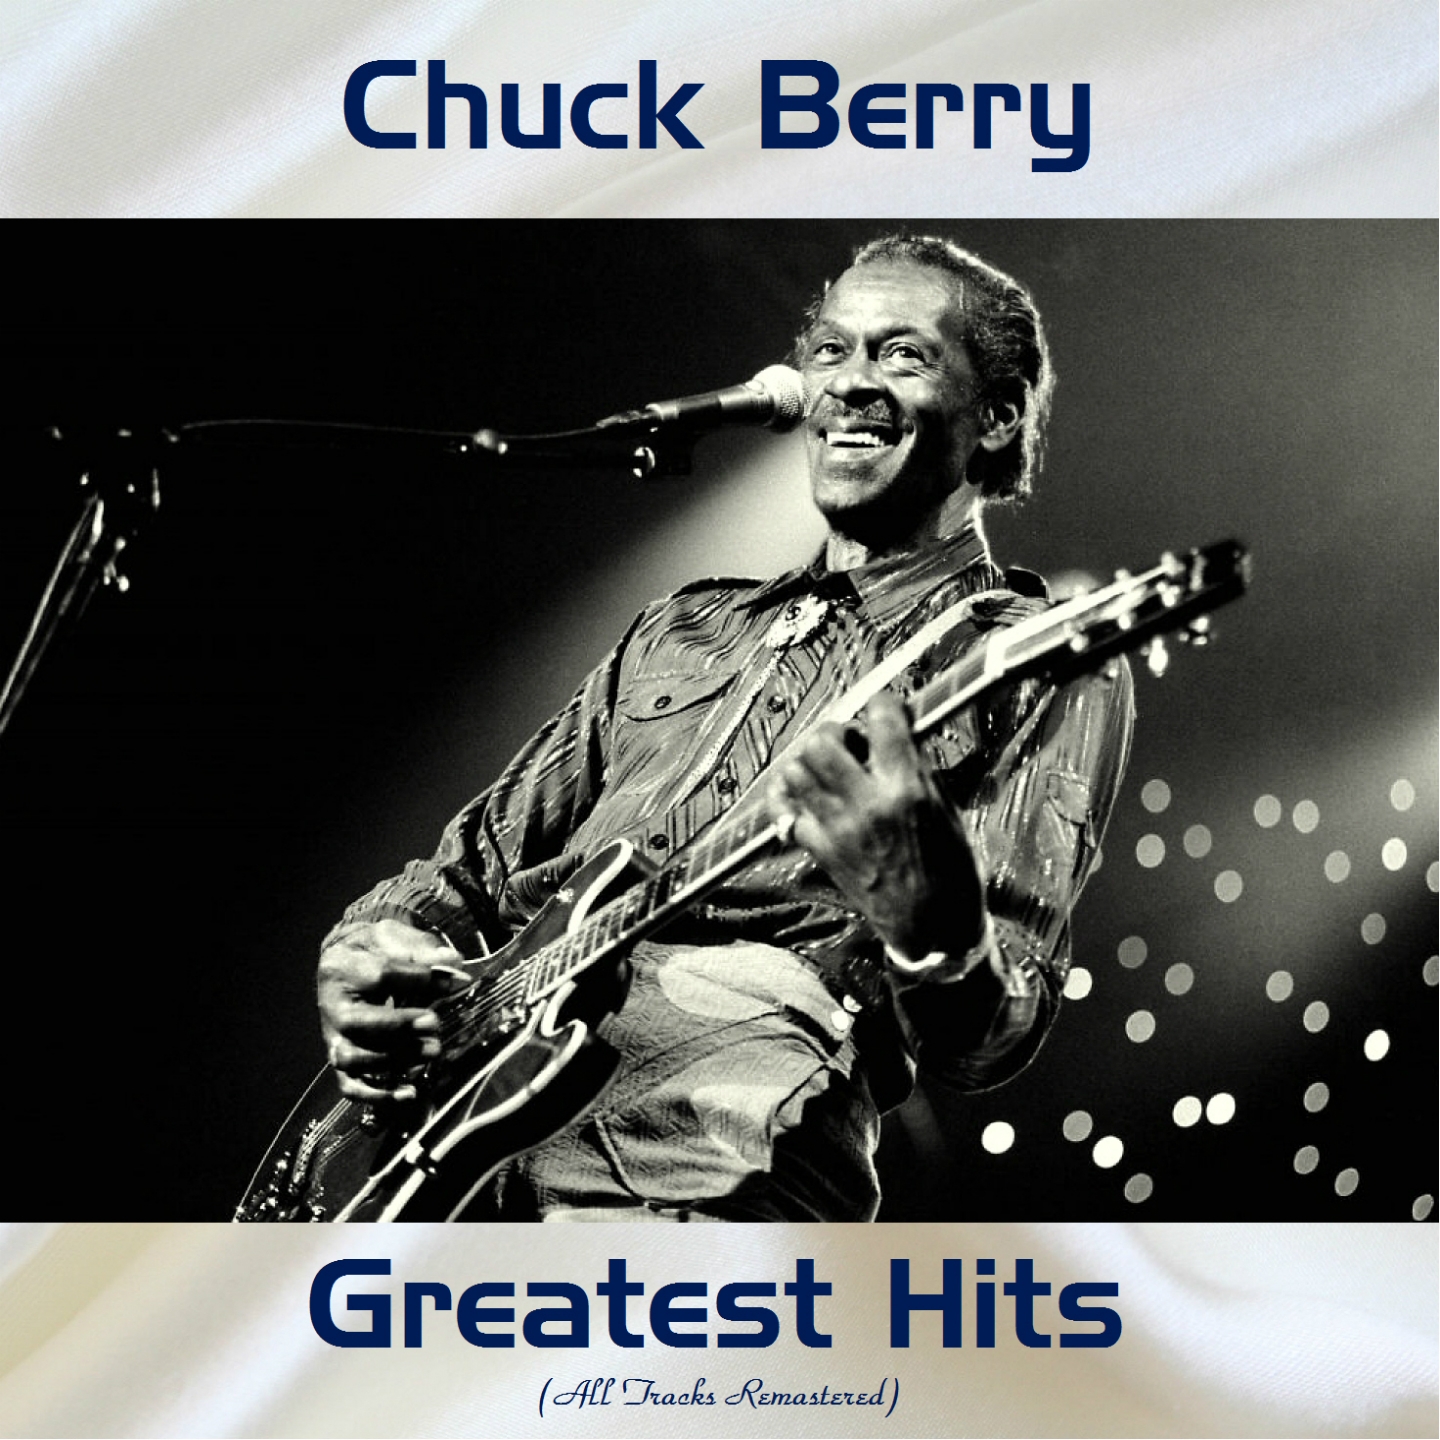 Chuck Berry Greatest Hits (All Tracks Remastered)